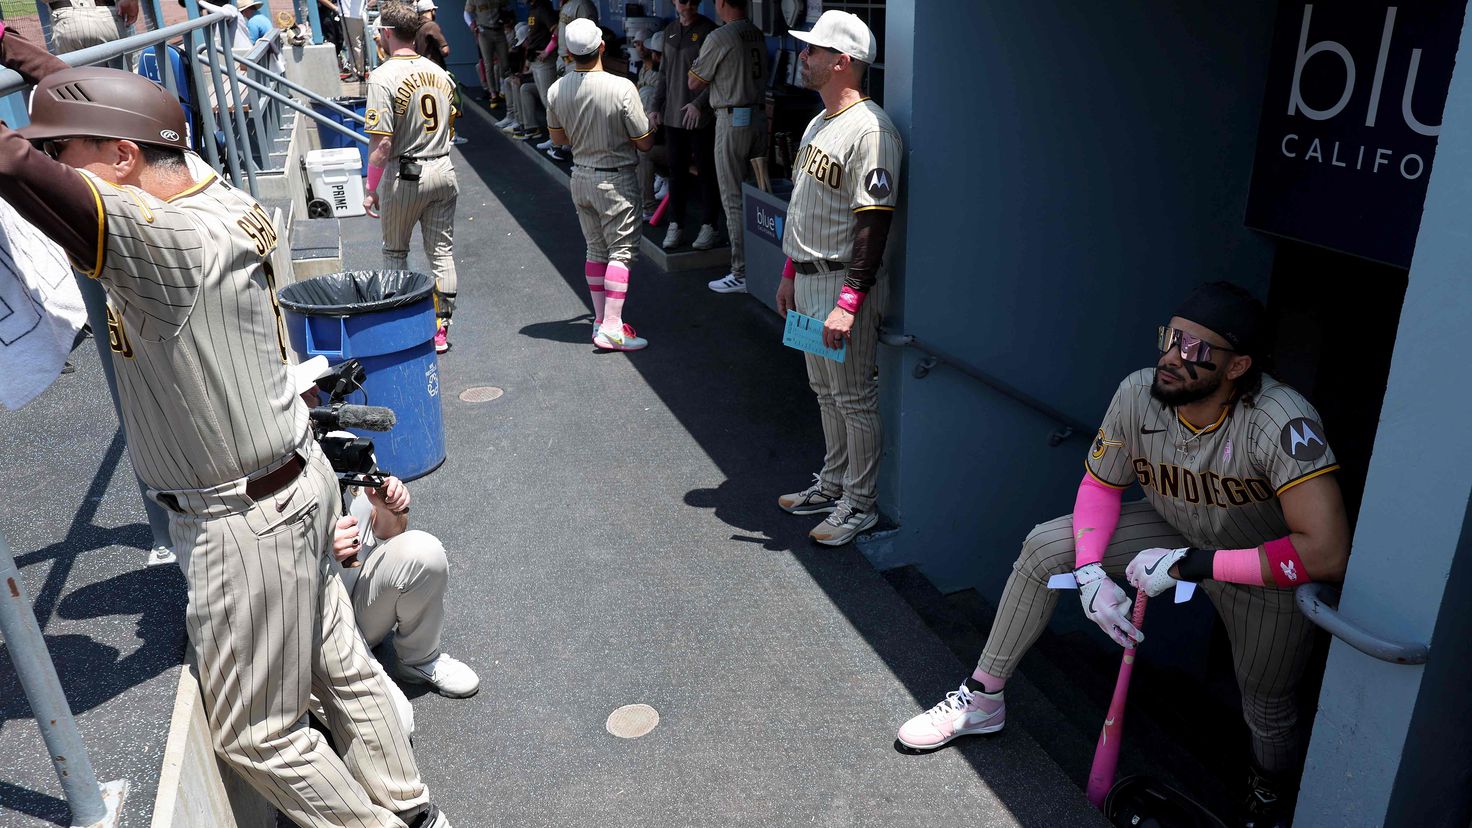 The San Diego Padres are approaching a $245 million catastrophe
